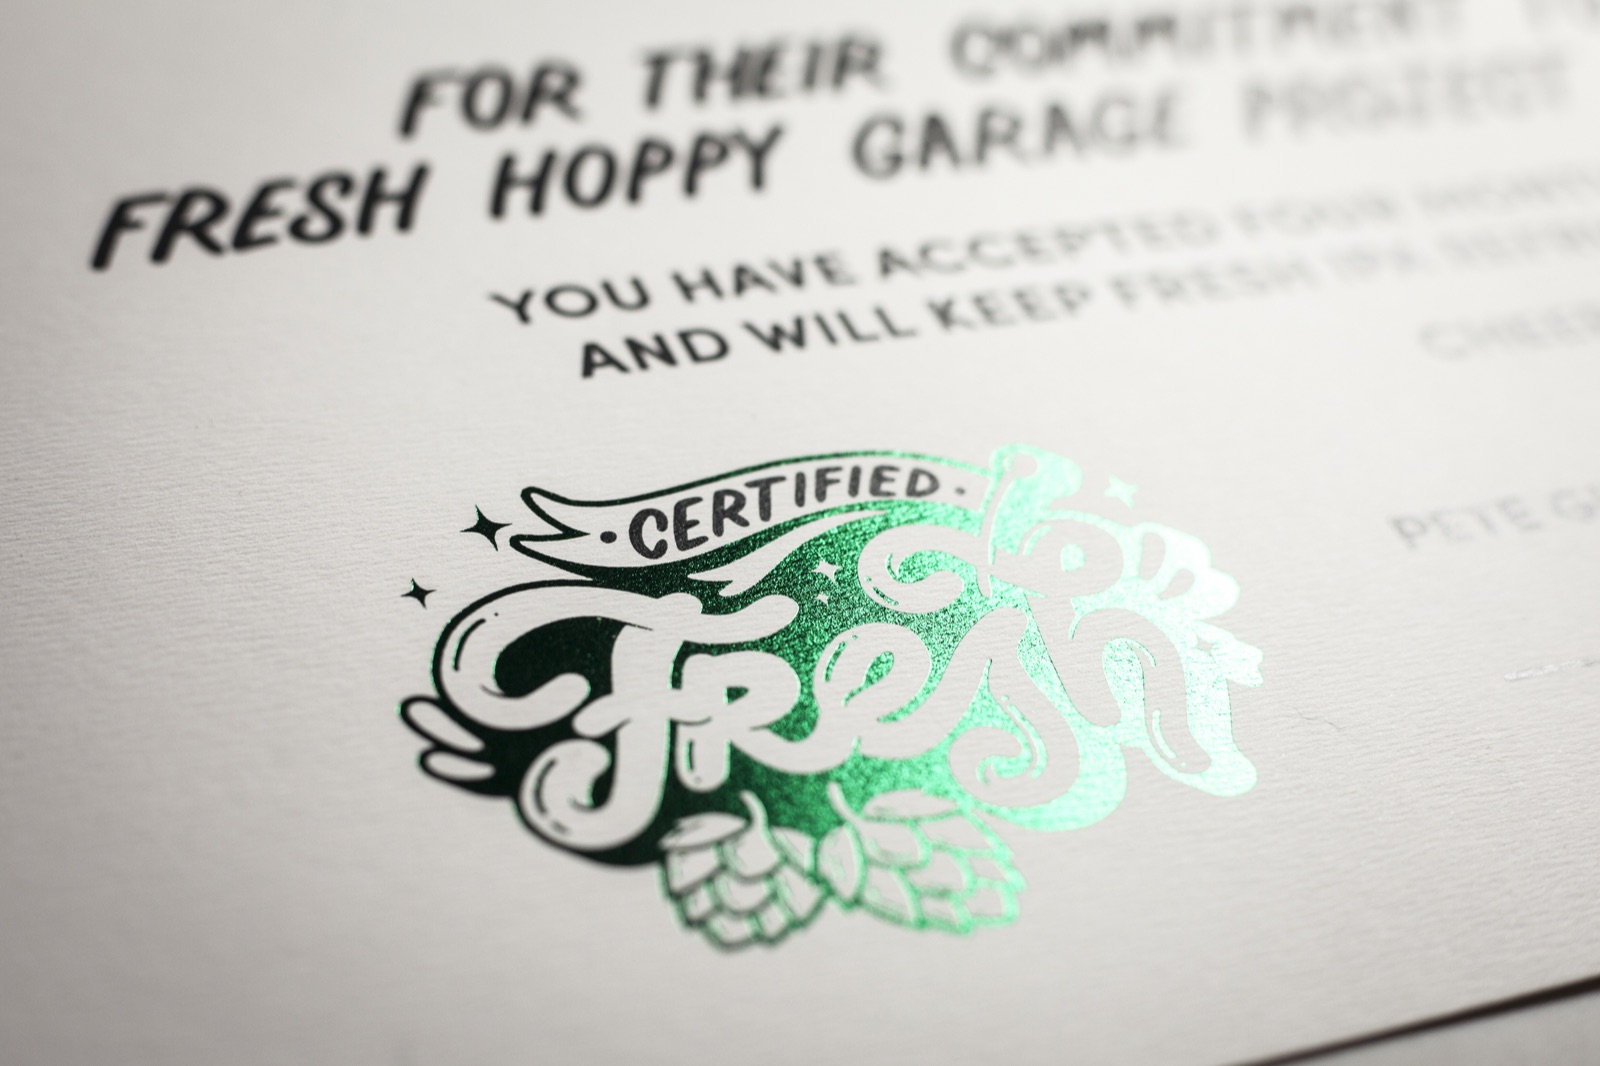 Printing Garage Project's certified fresh certificates.